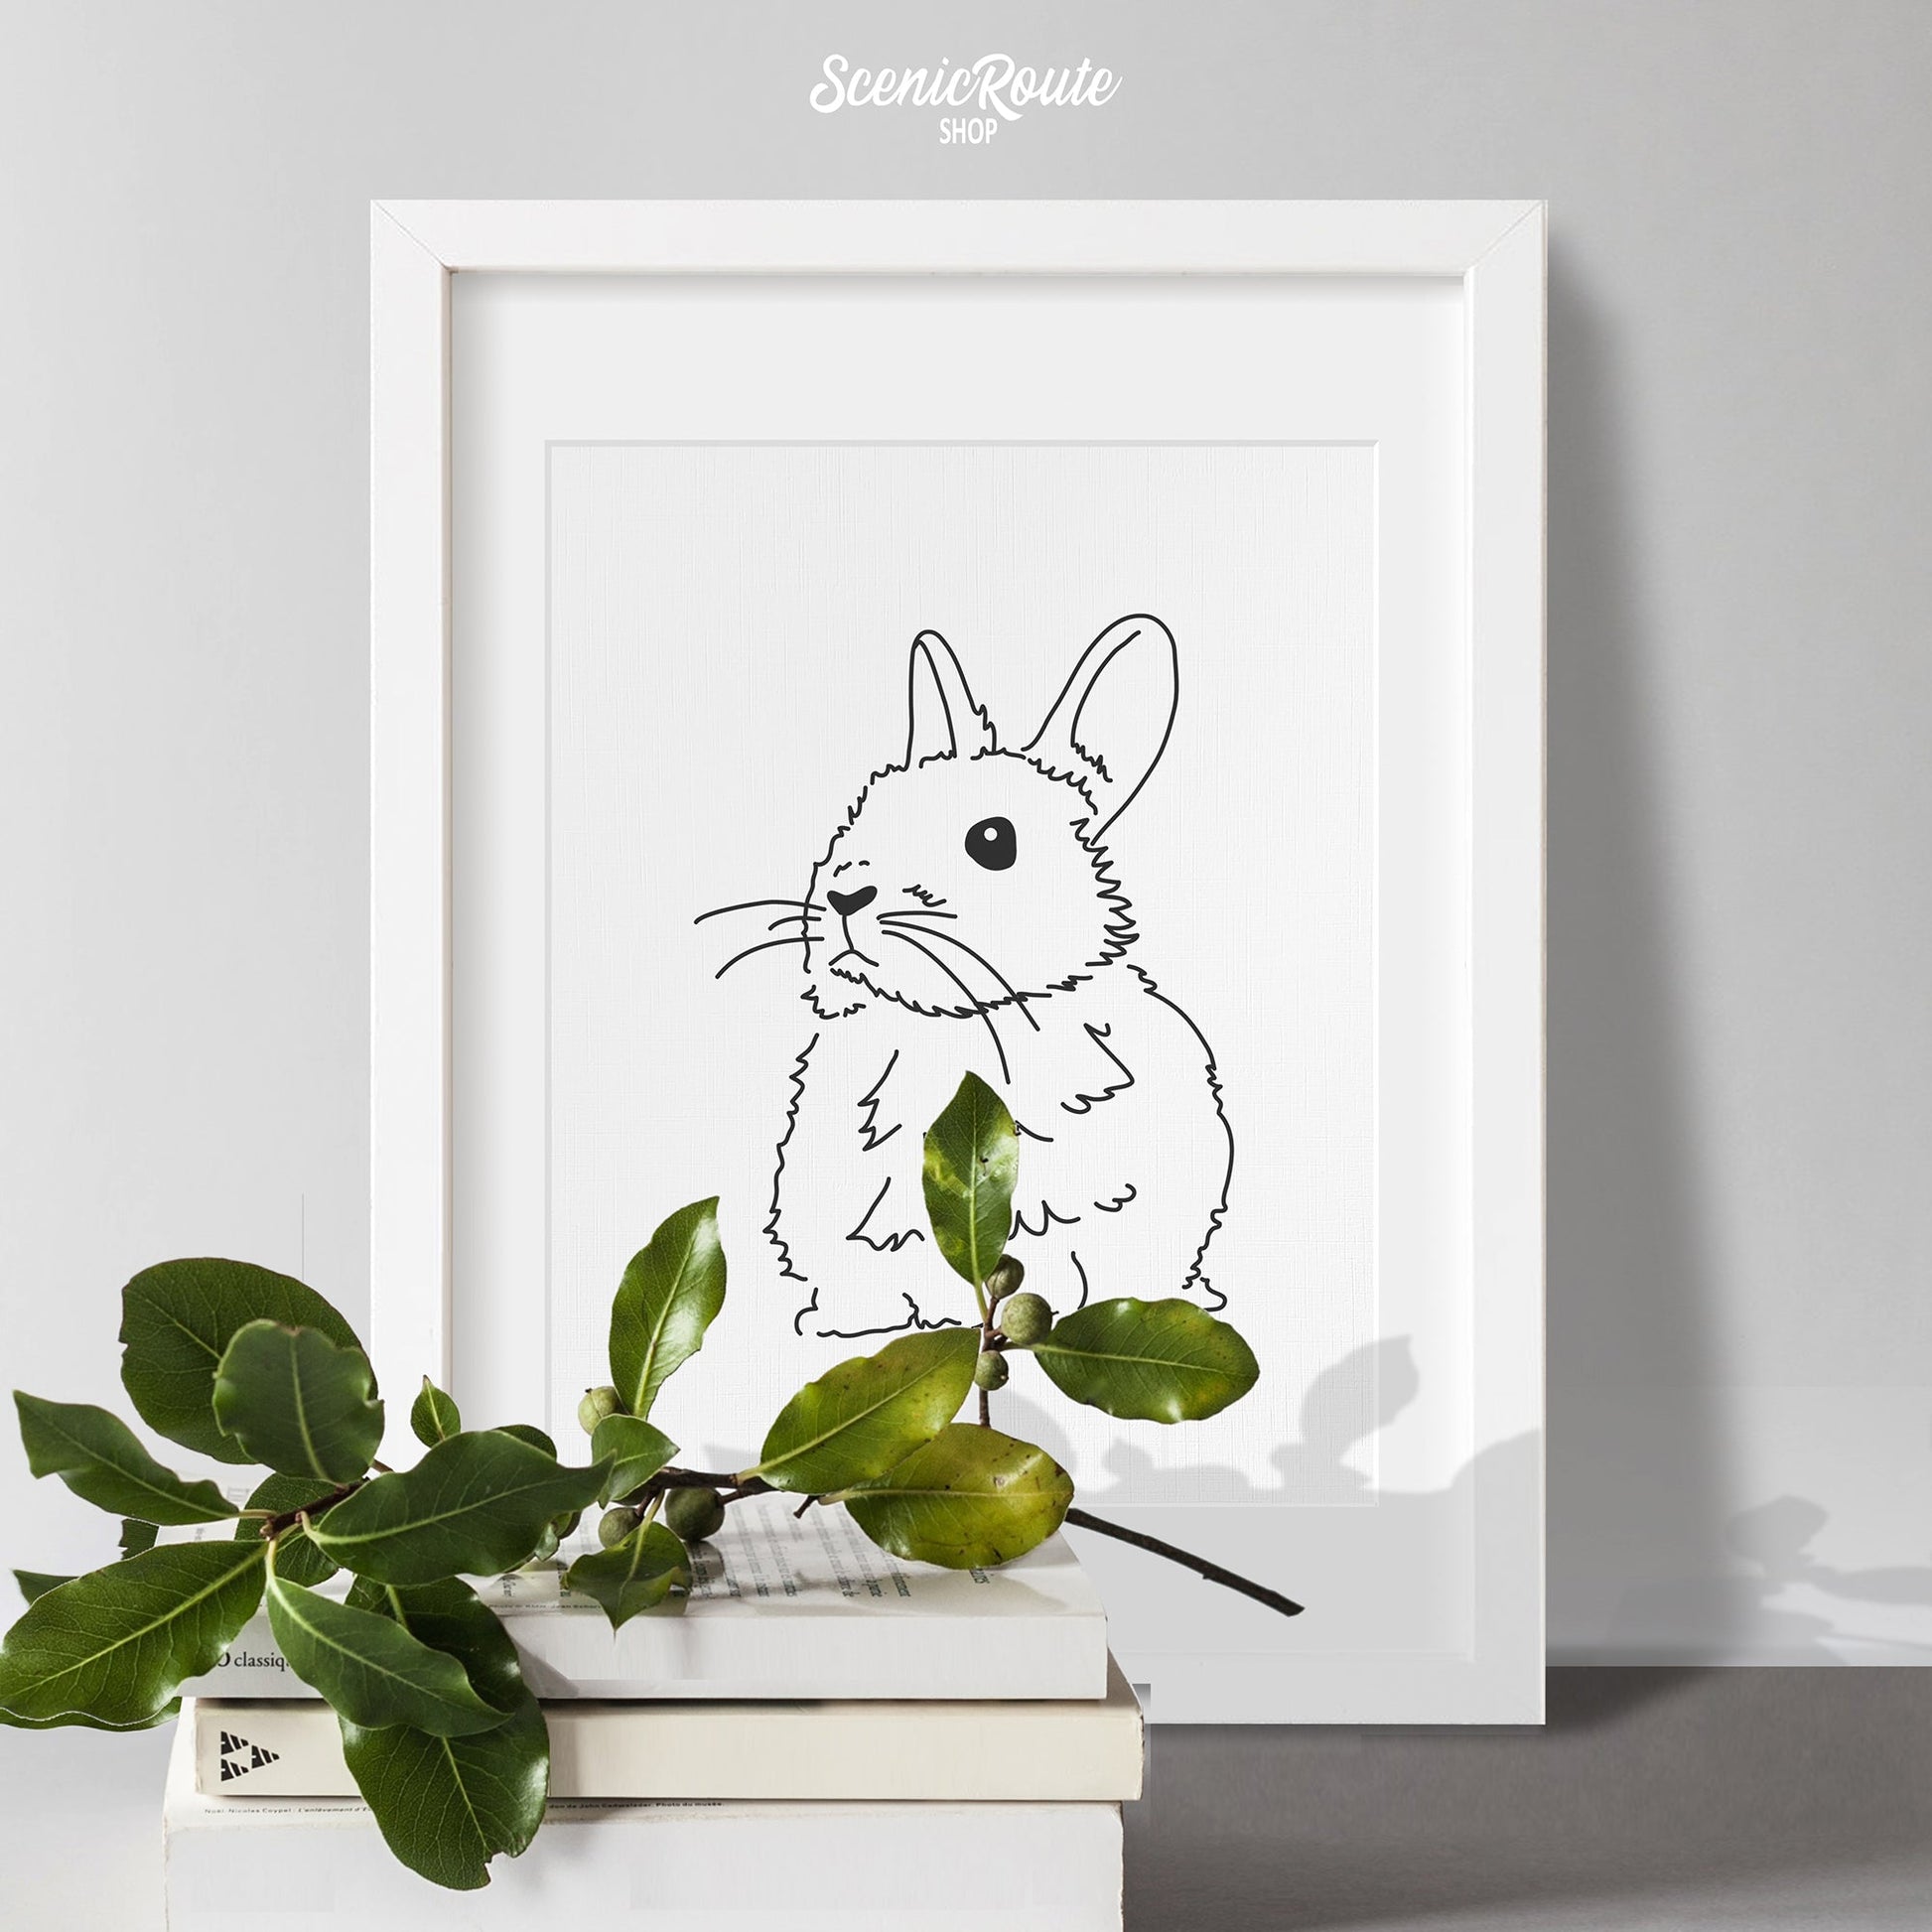 A framed line art drawing of a Netherland Dwarf Rabbit on a table with books and a plant